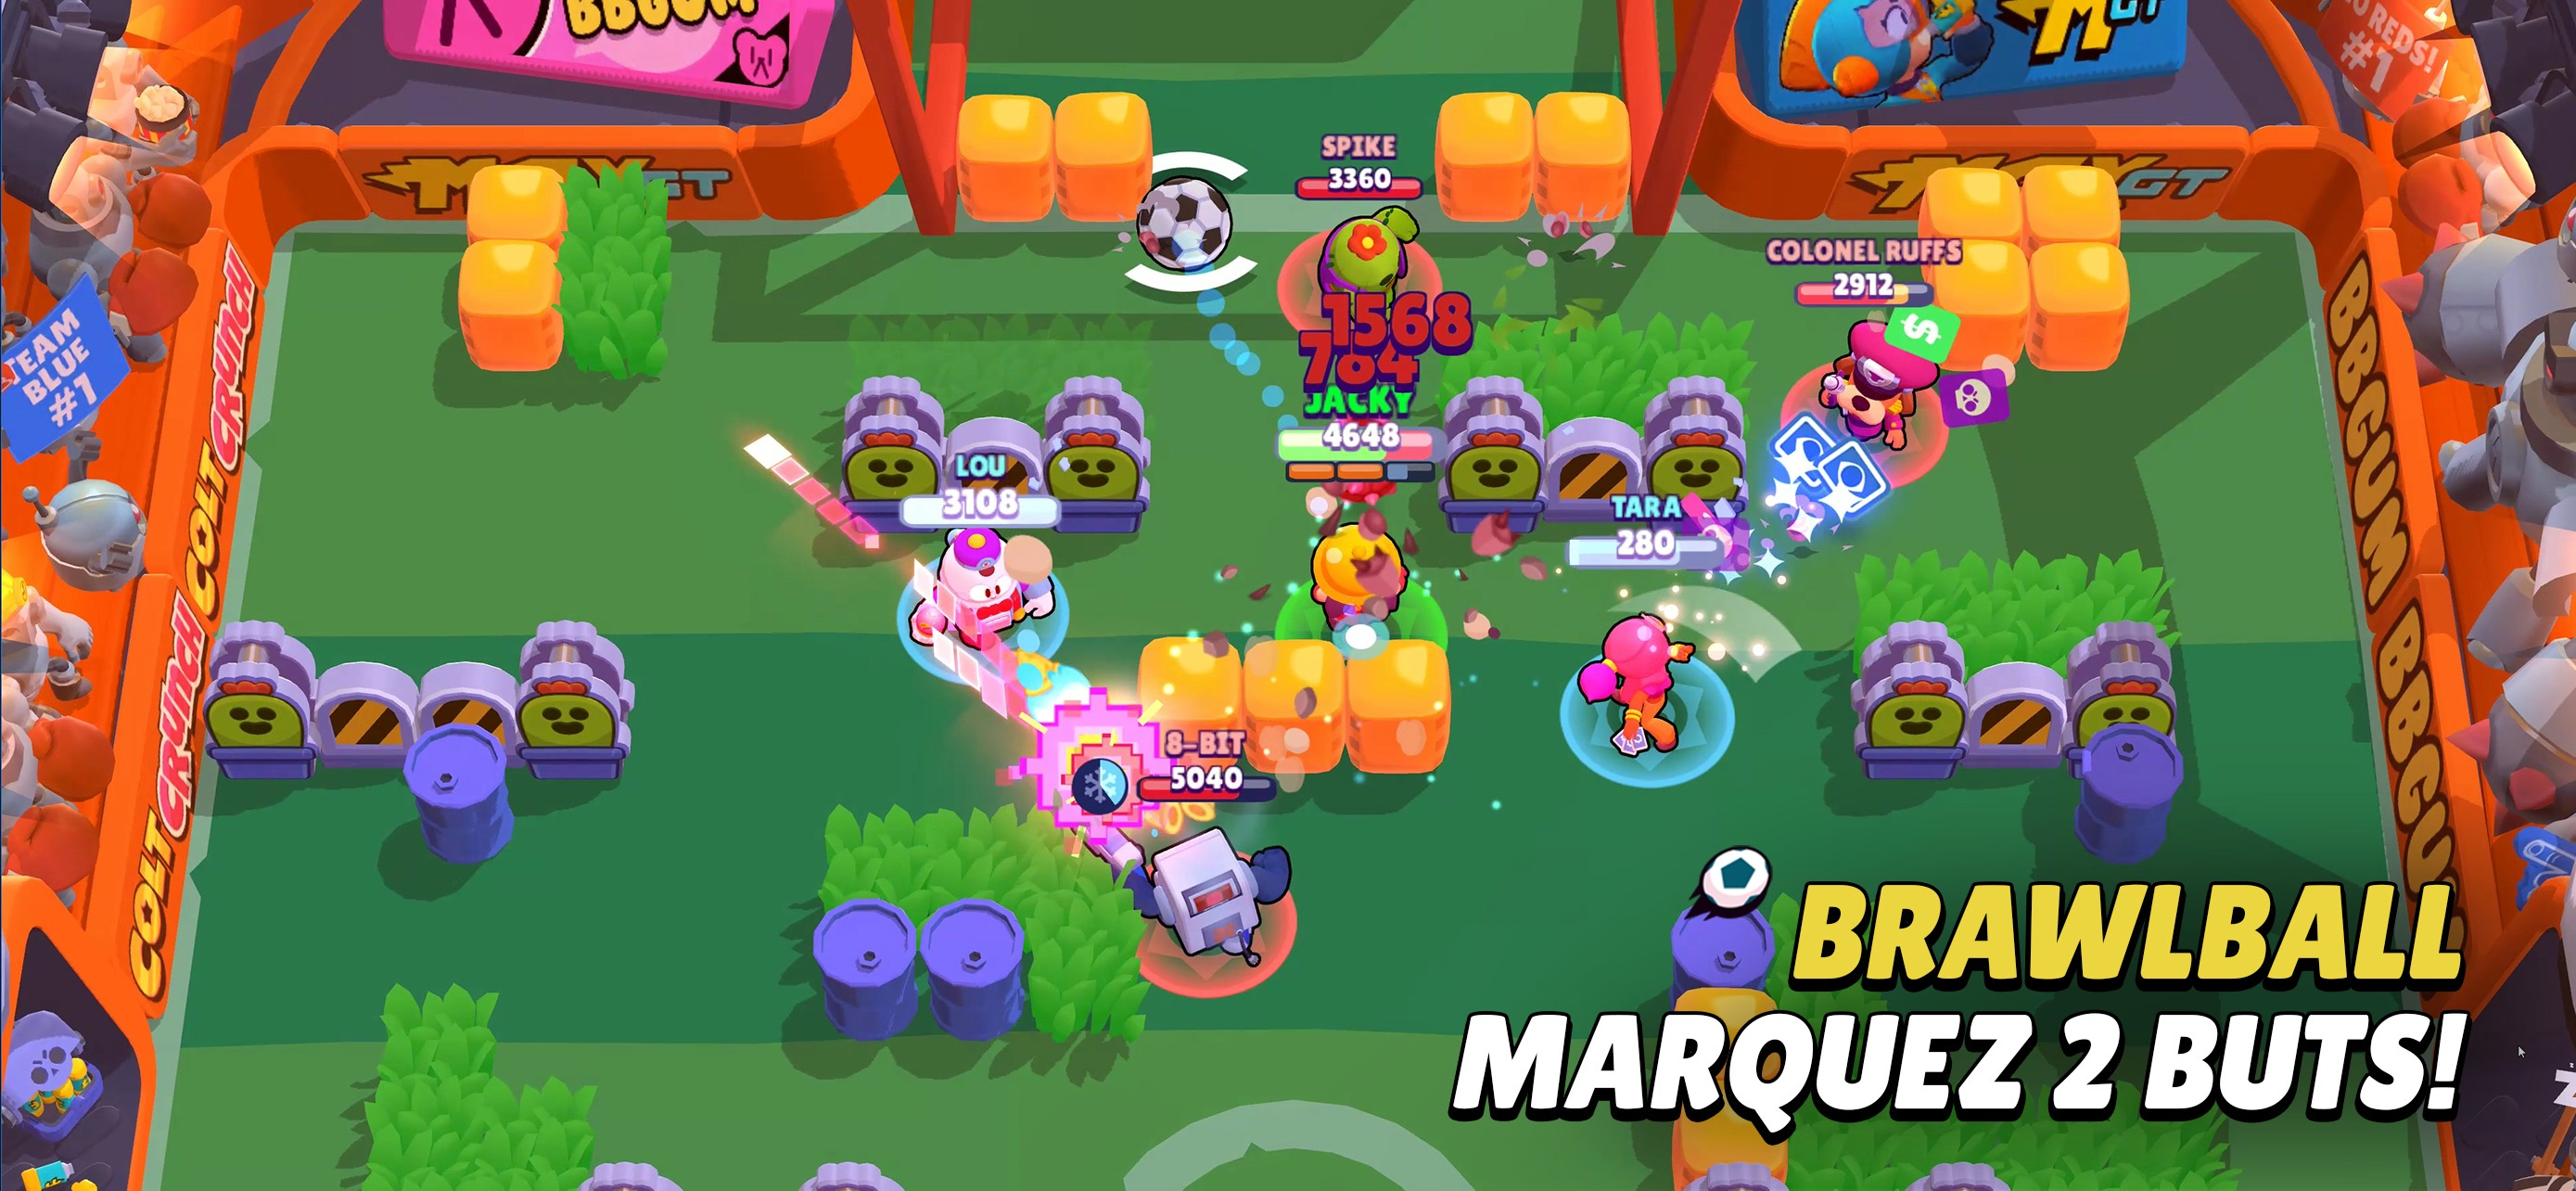 Brawl Stars Overview Apple App Store France - brawl star personnage gemme pour brawler